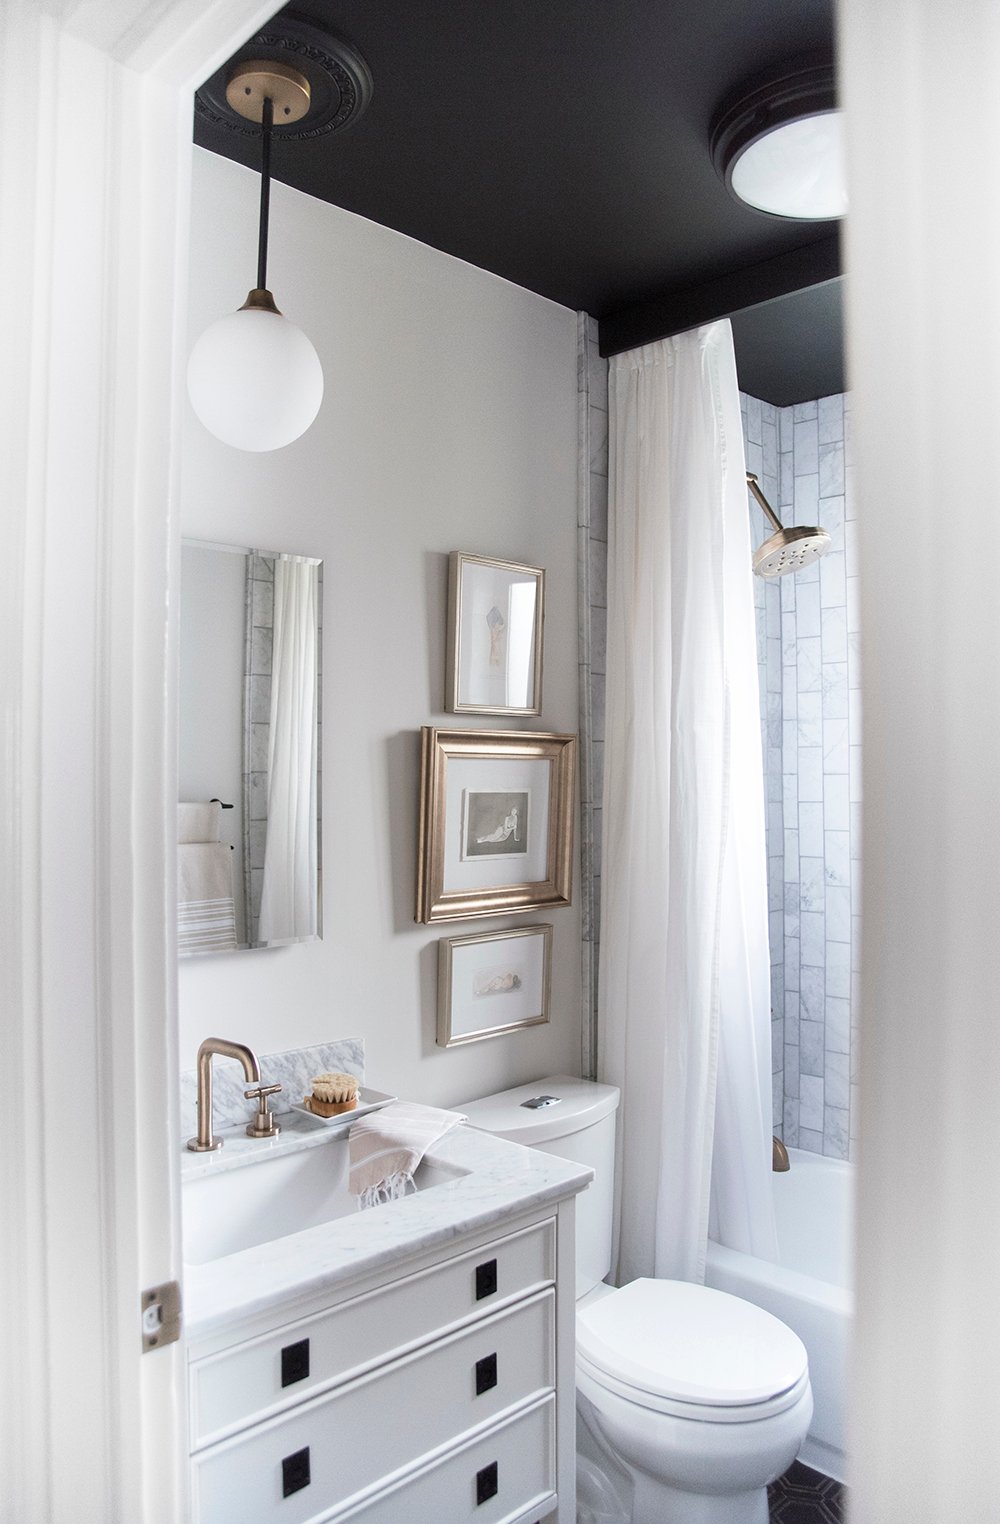 https://roomfortuesday.com/wp-content/uploads/2017/11/Room-for-Tuesday-Bathroom-Reveal.jpg